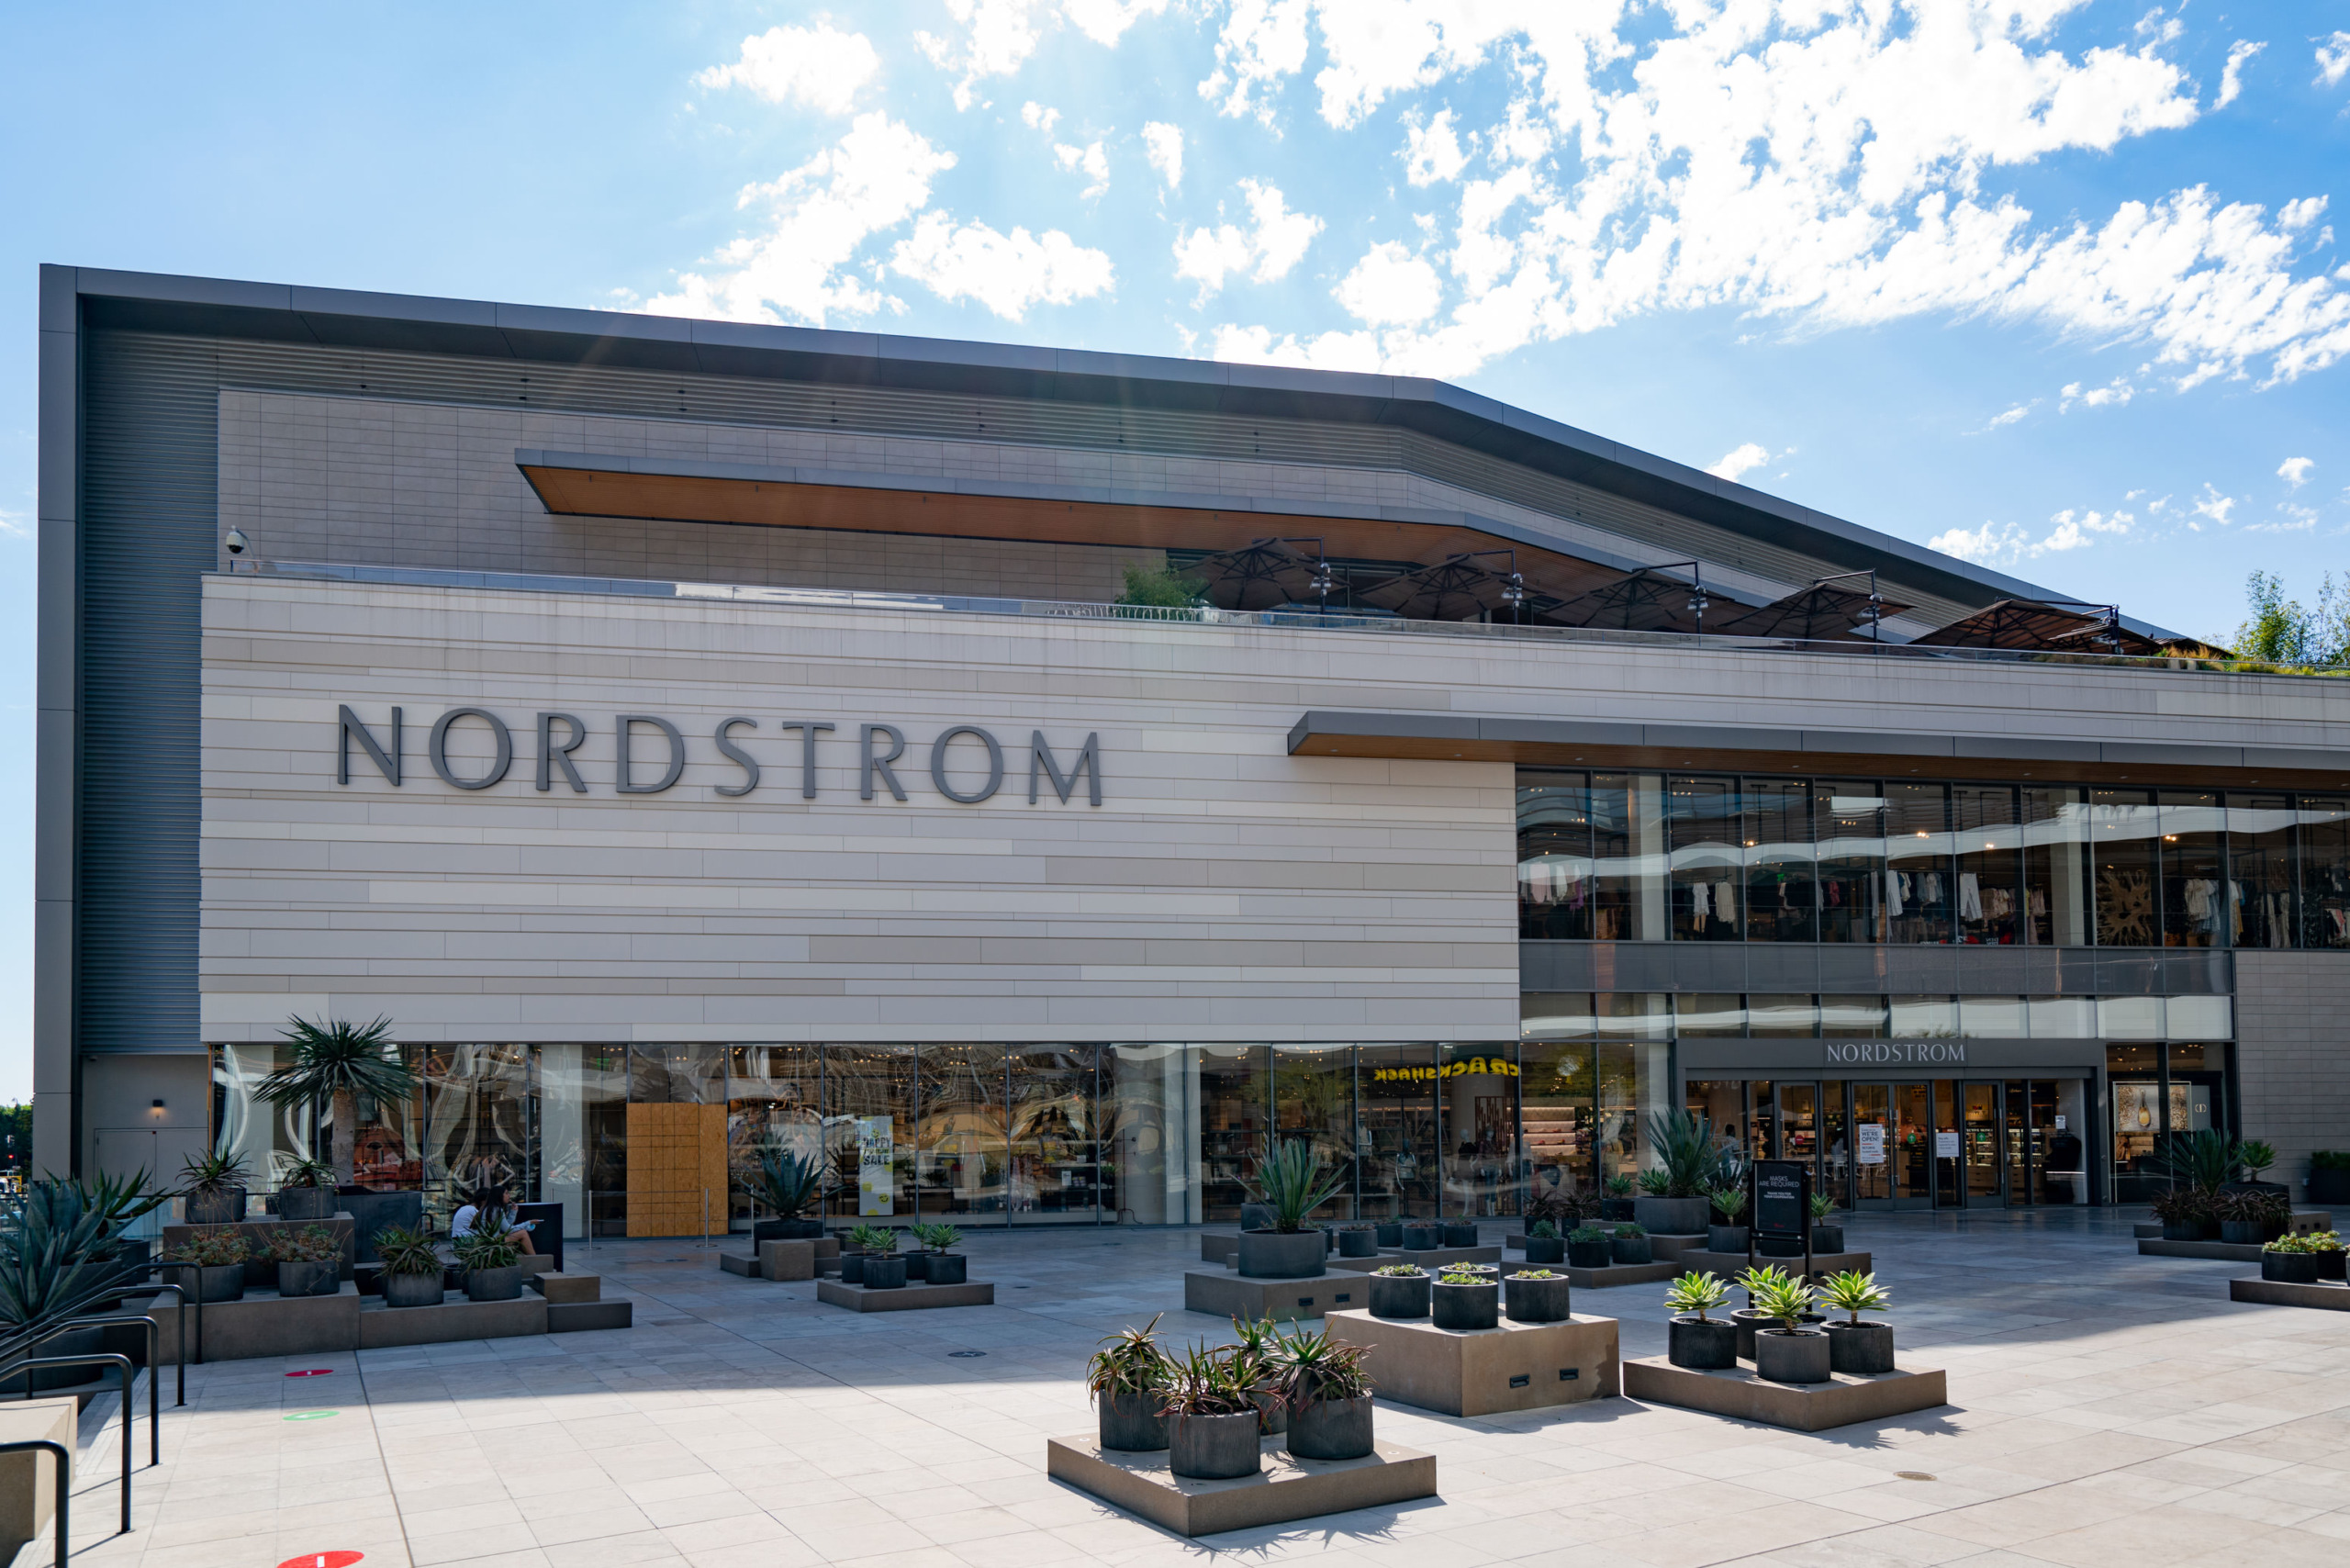 A Nordstrom brick-and-mortar outlet.